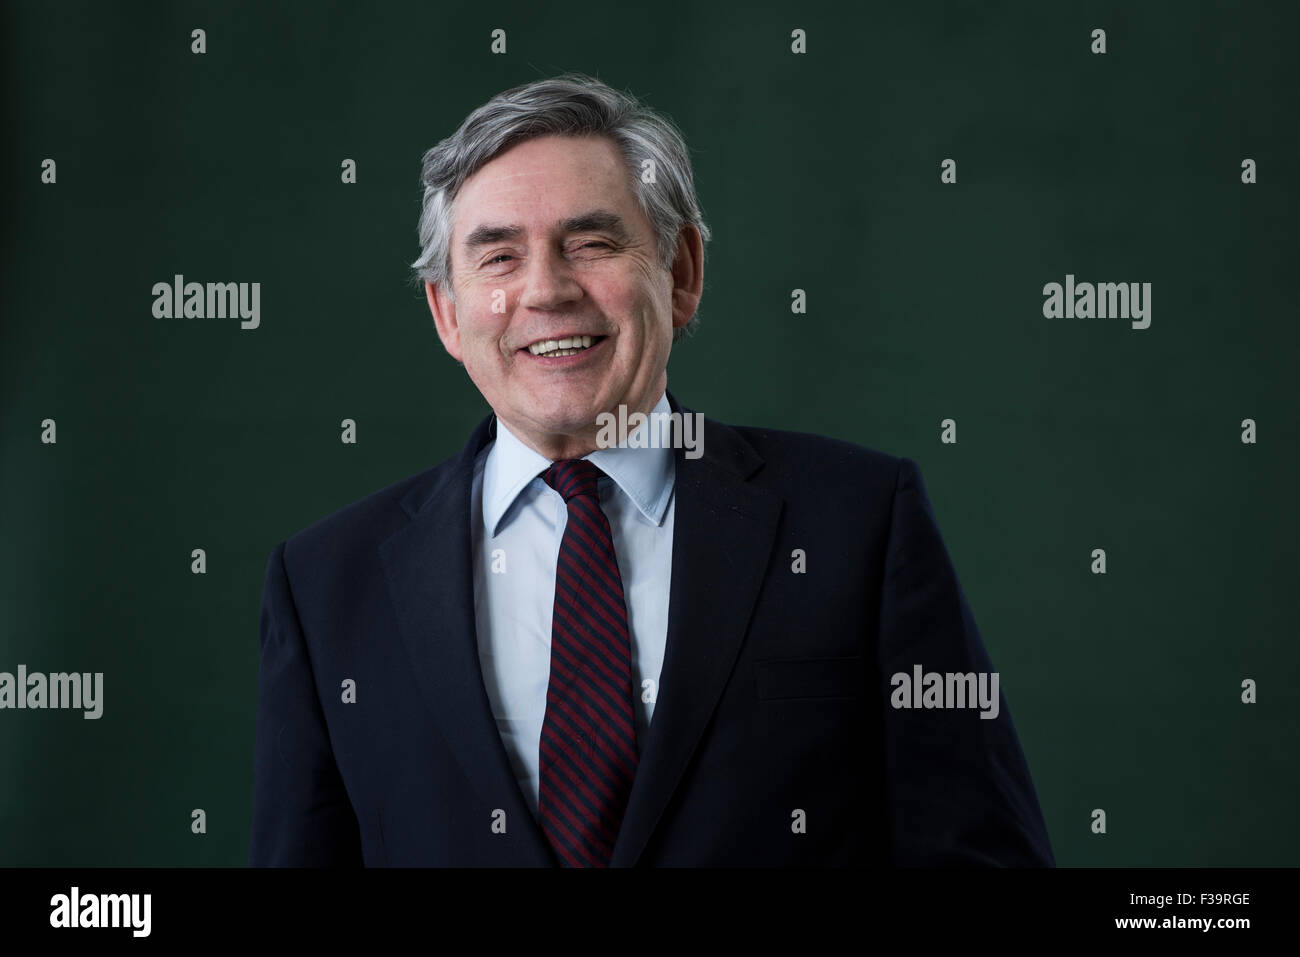 British Labour Party politician and former Prime Minister of the United Kingdom and Leader of the Labour Party, Gordon Brown. Stock Photo